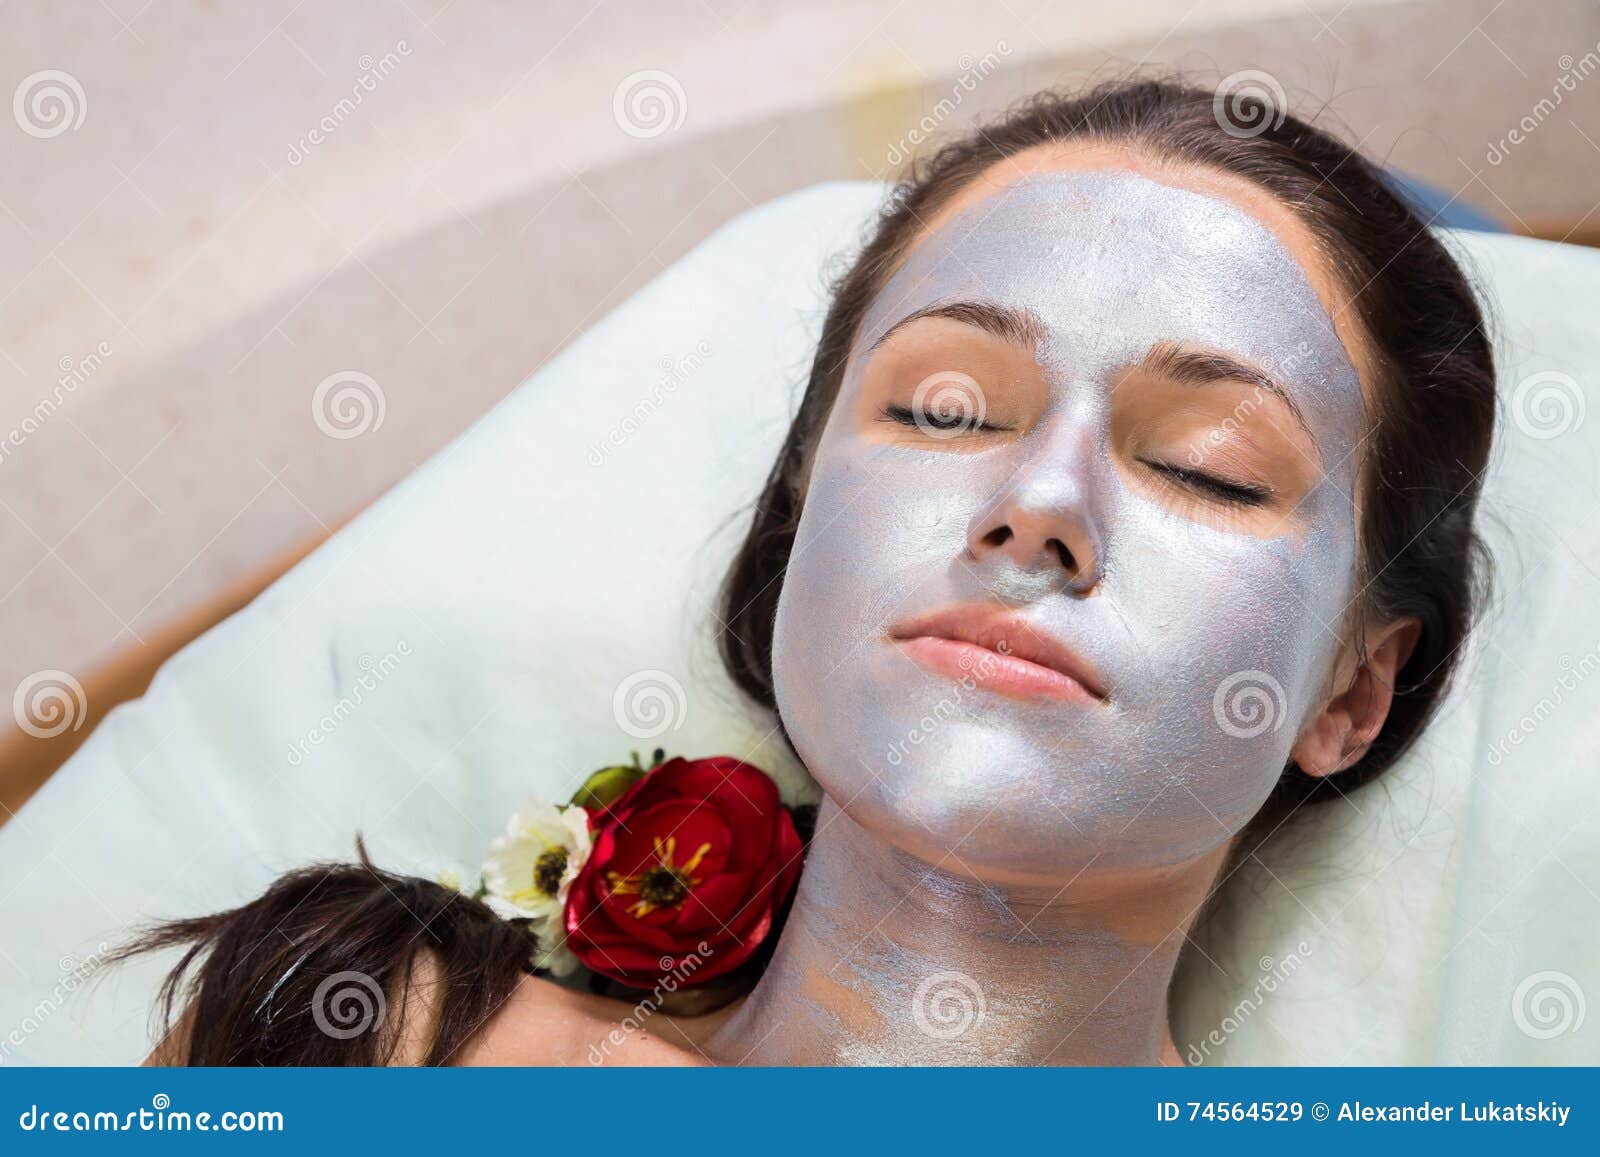 Beautiful Girl At Spa Procedures Stock Image Image Of Face Person 74564529